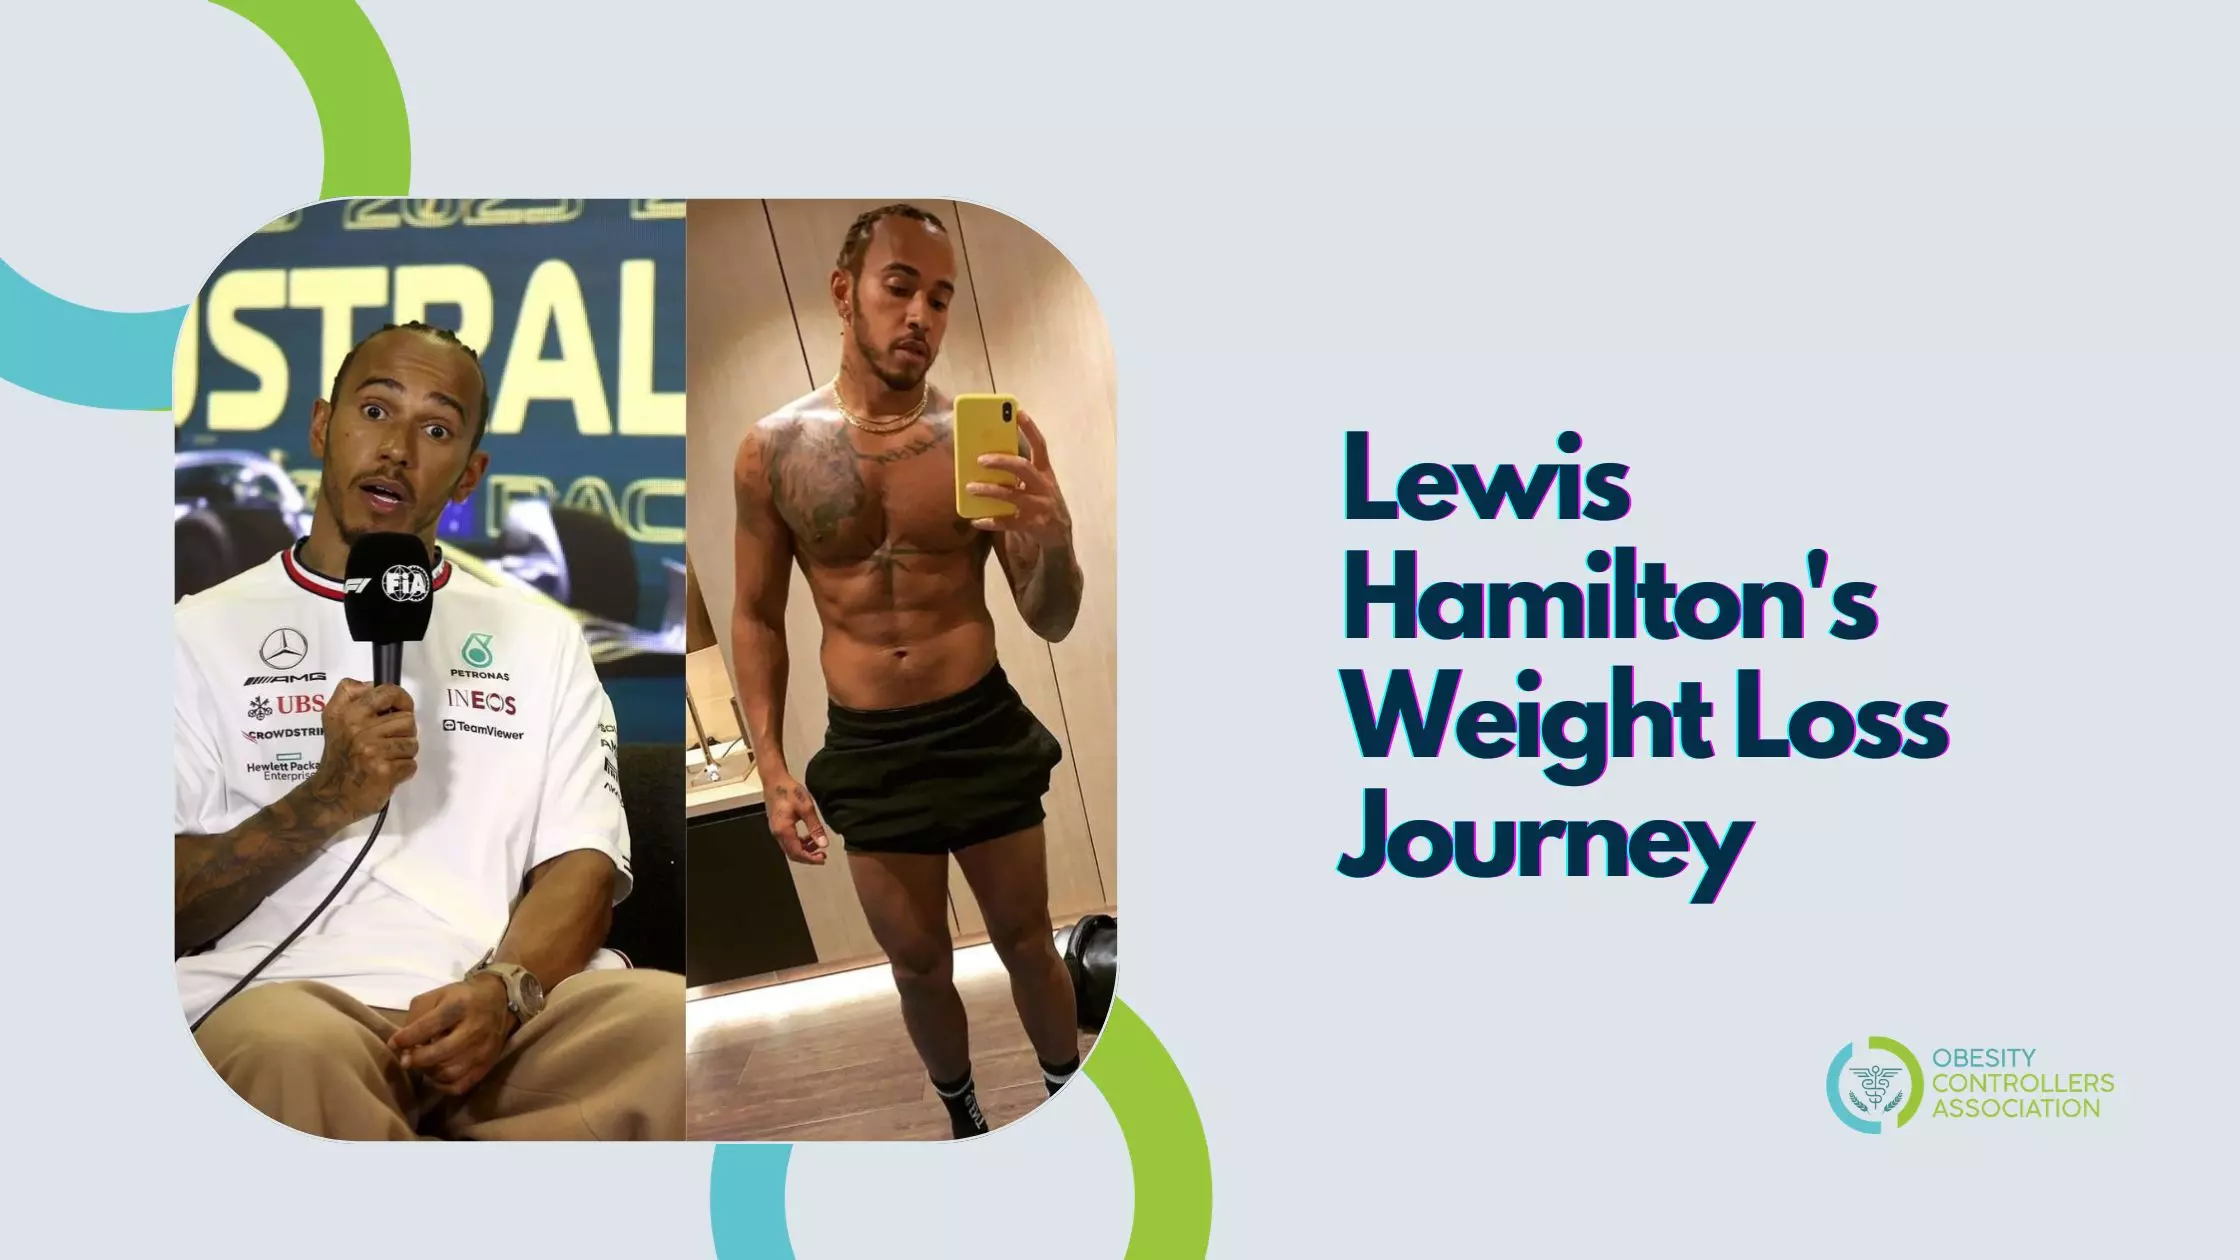 Lewis Hamilton's Weight Loss Journey